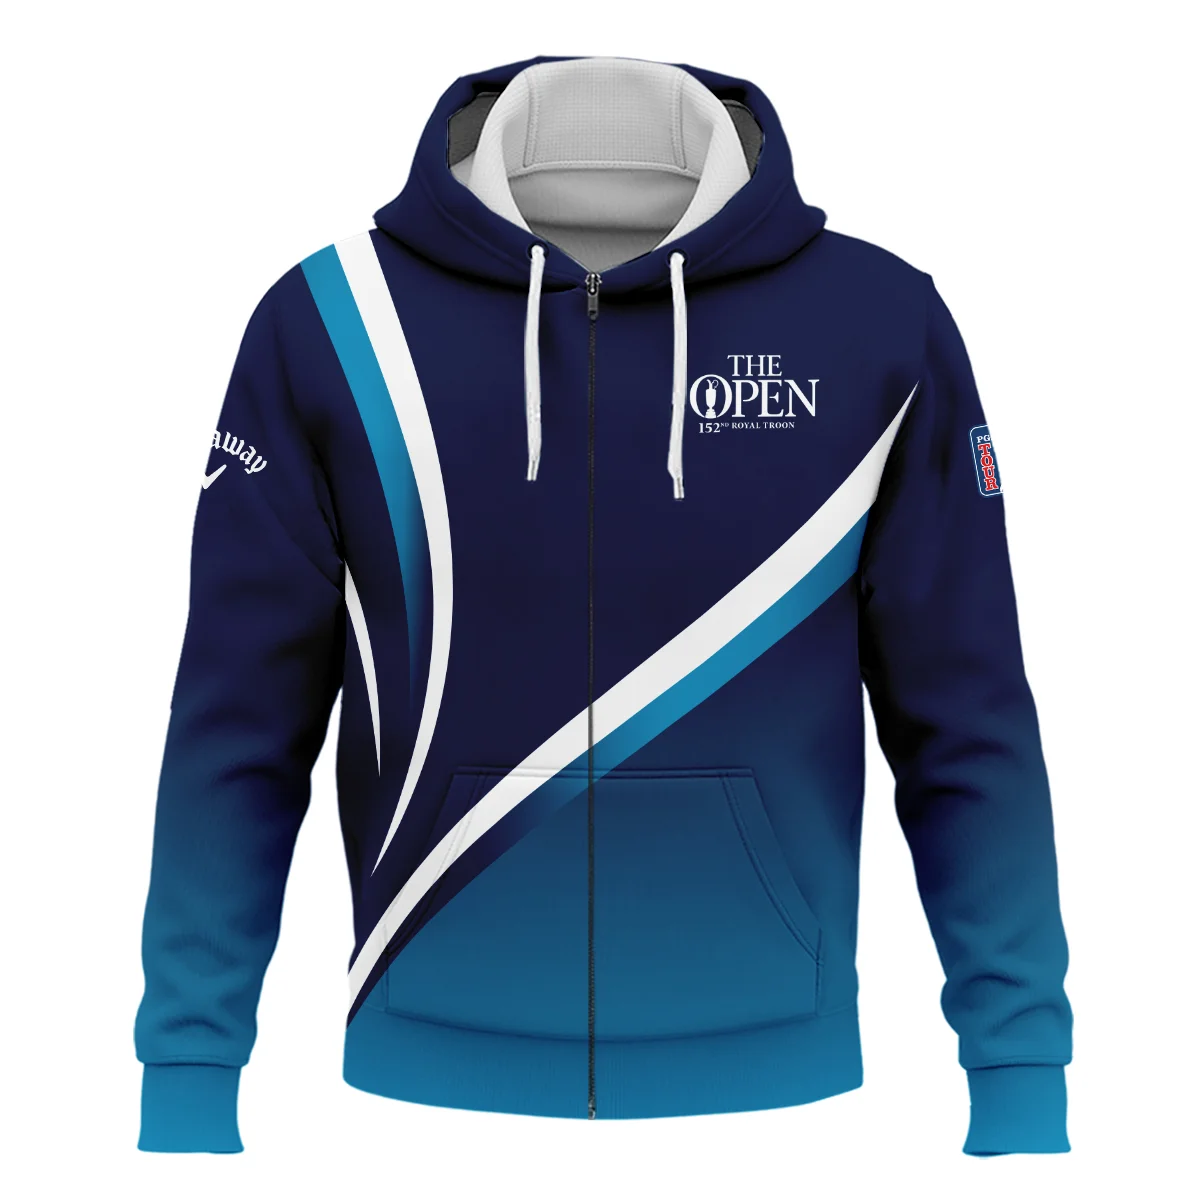 Callaway 152nd Open Championship Dark Blue Gradient White Abstract Background Performance Quarter Zip Sweatshirt With Pockets All Over Prints HOTOP260624A03CLWTS